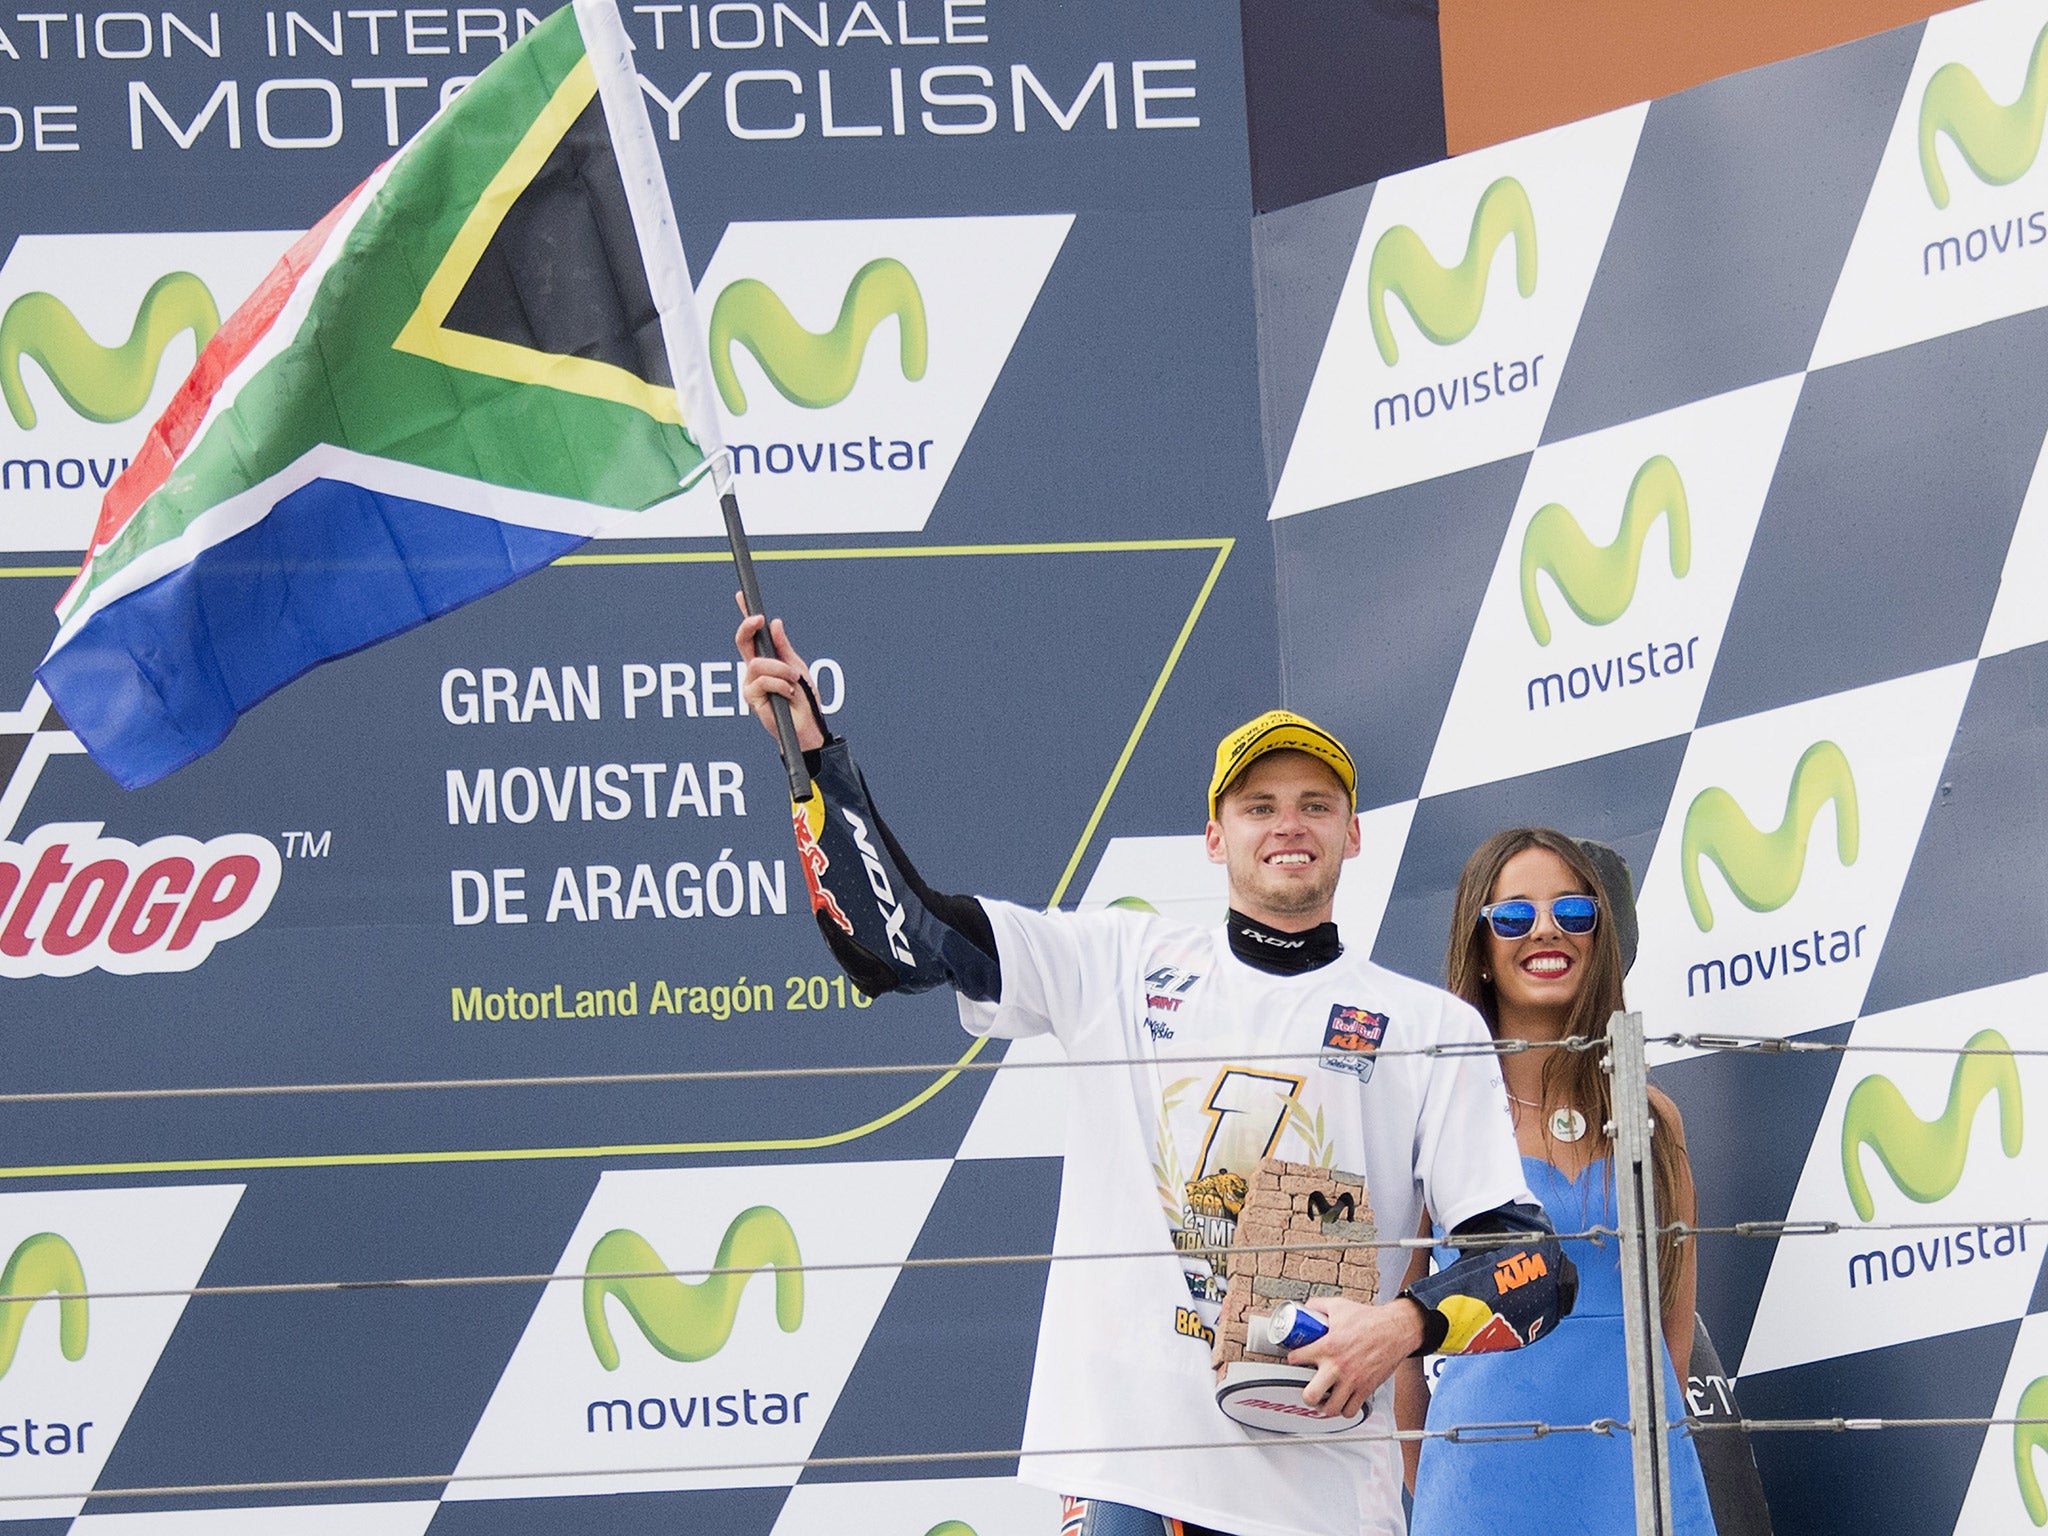 Brad Binder was crowned Moto3 world champion after finishing second at Aragon